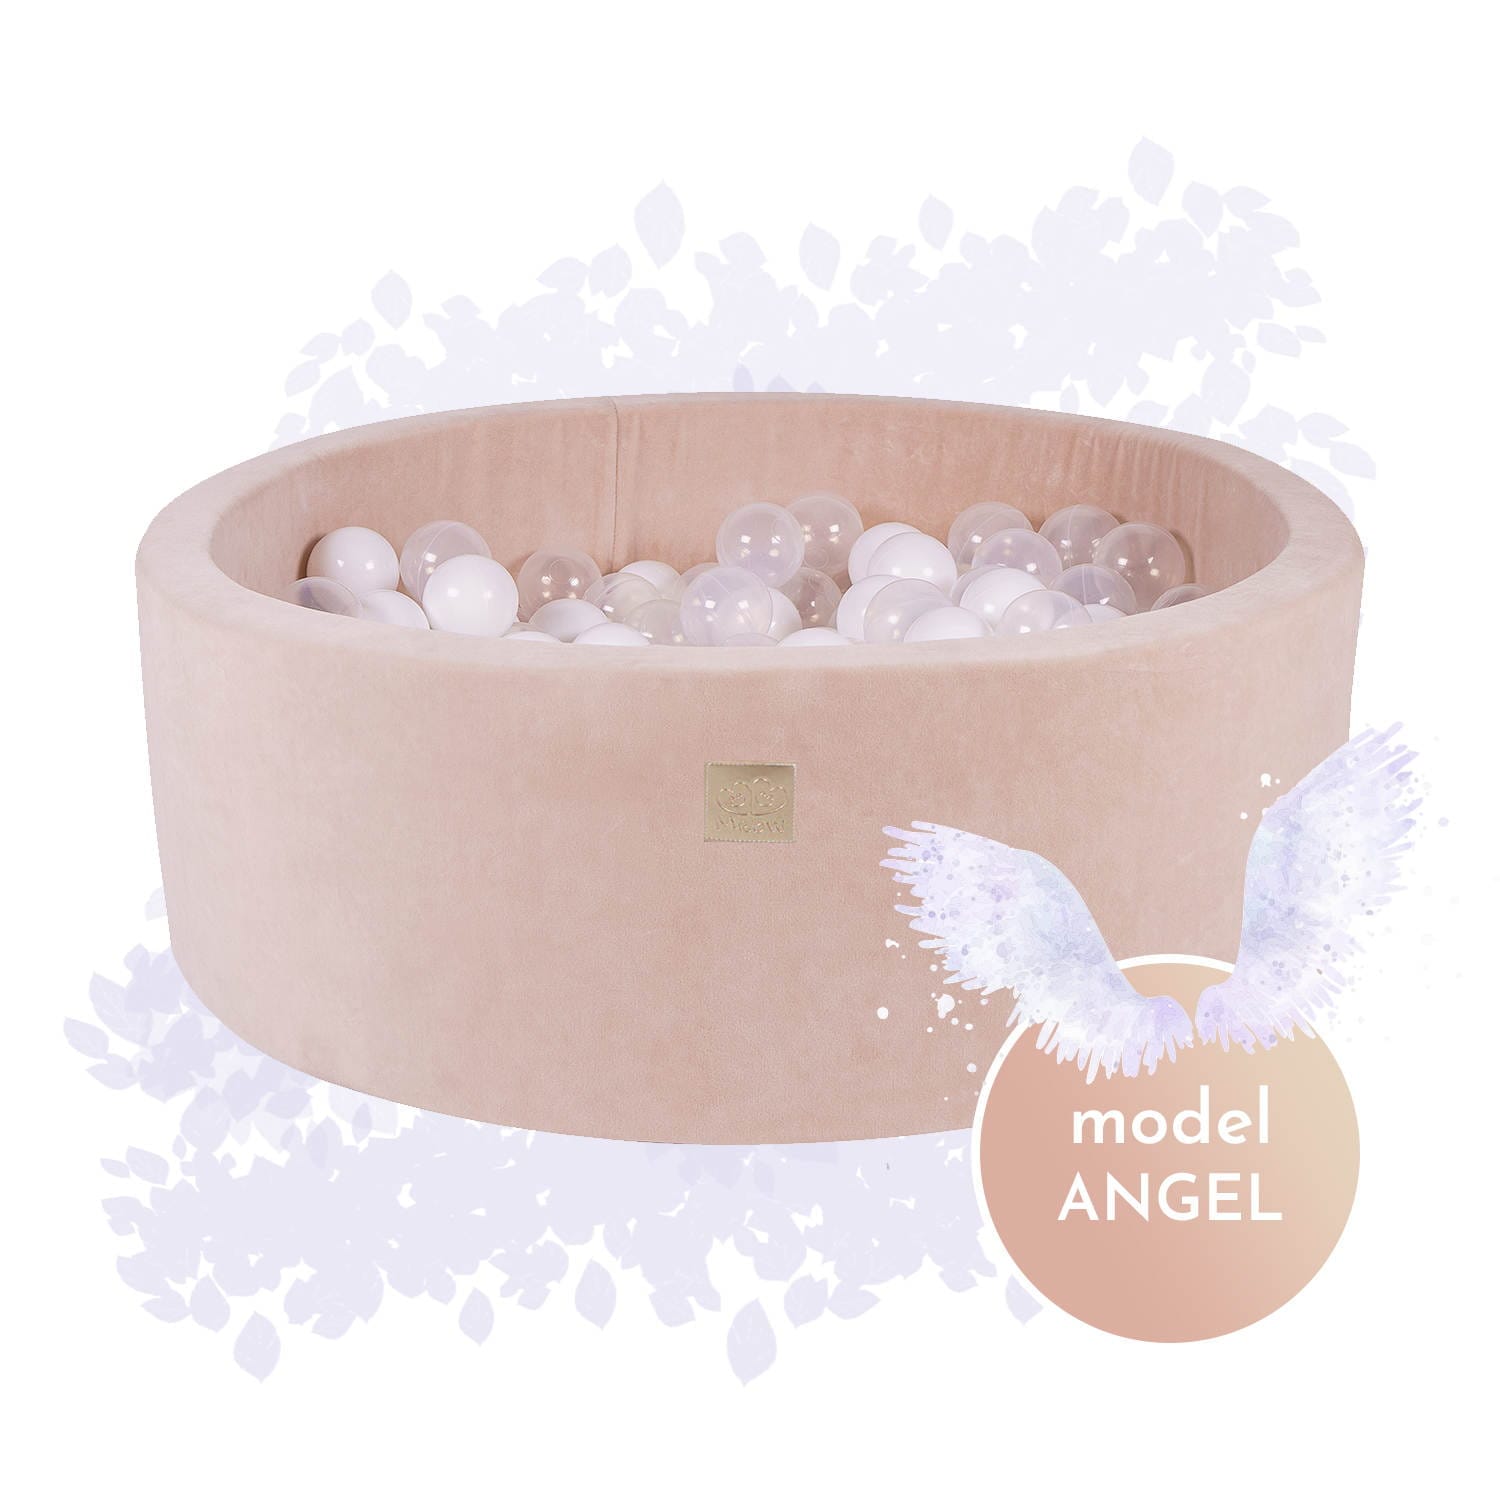 Luxury Velvet Round Ball Pit - Angel For Kids By MeowBaby - Stylemykid.com